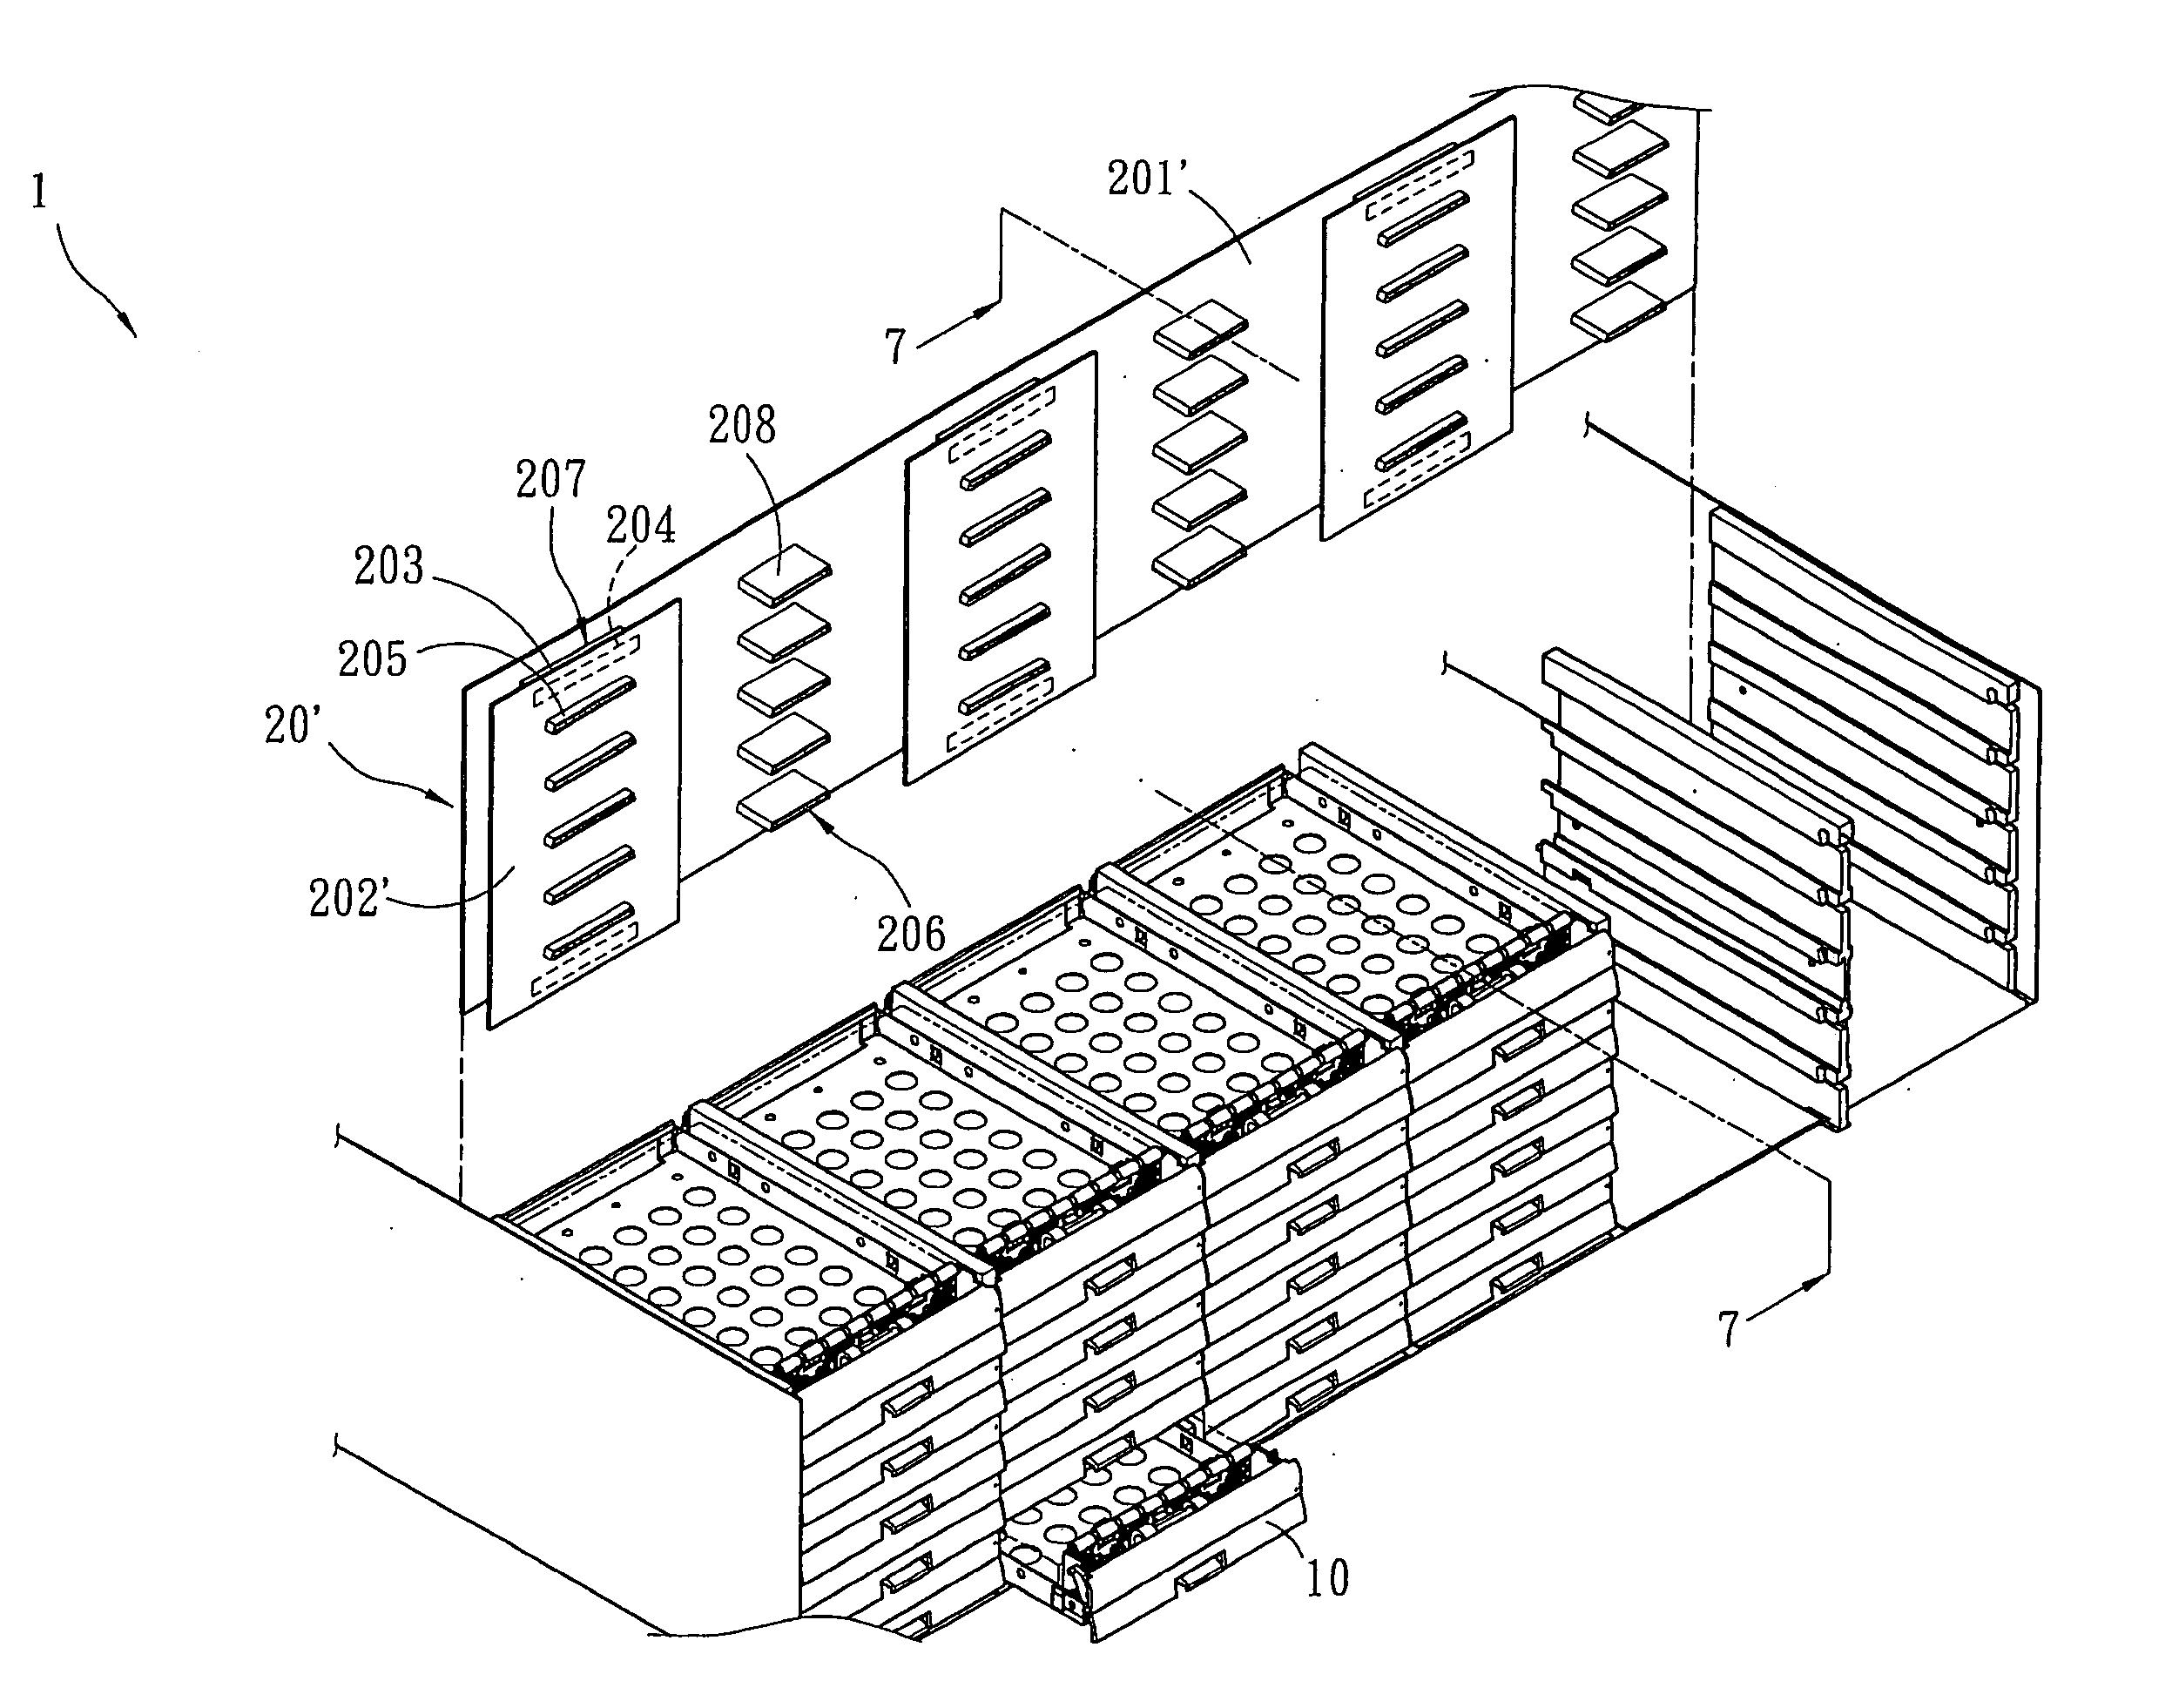 Circuit board group for electrically coupling electronic devices